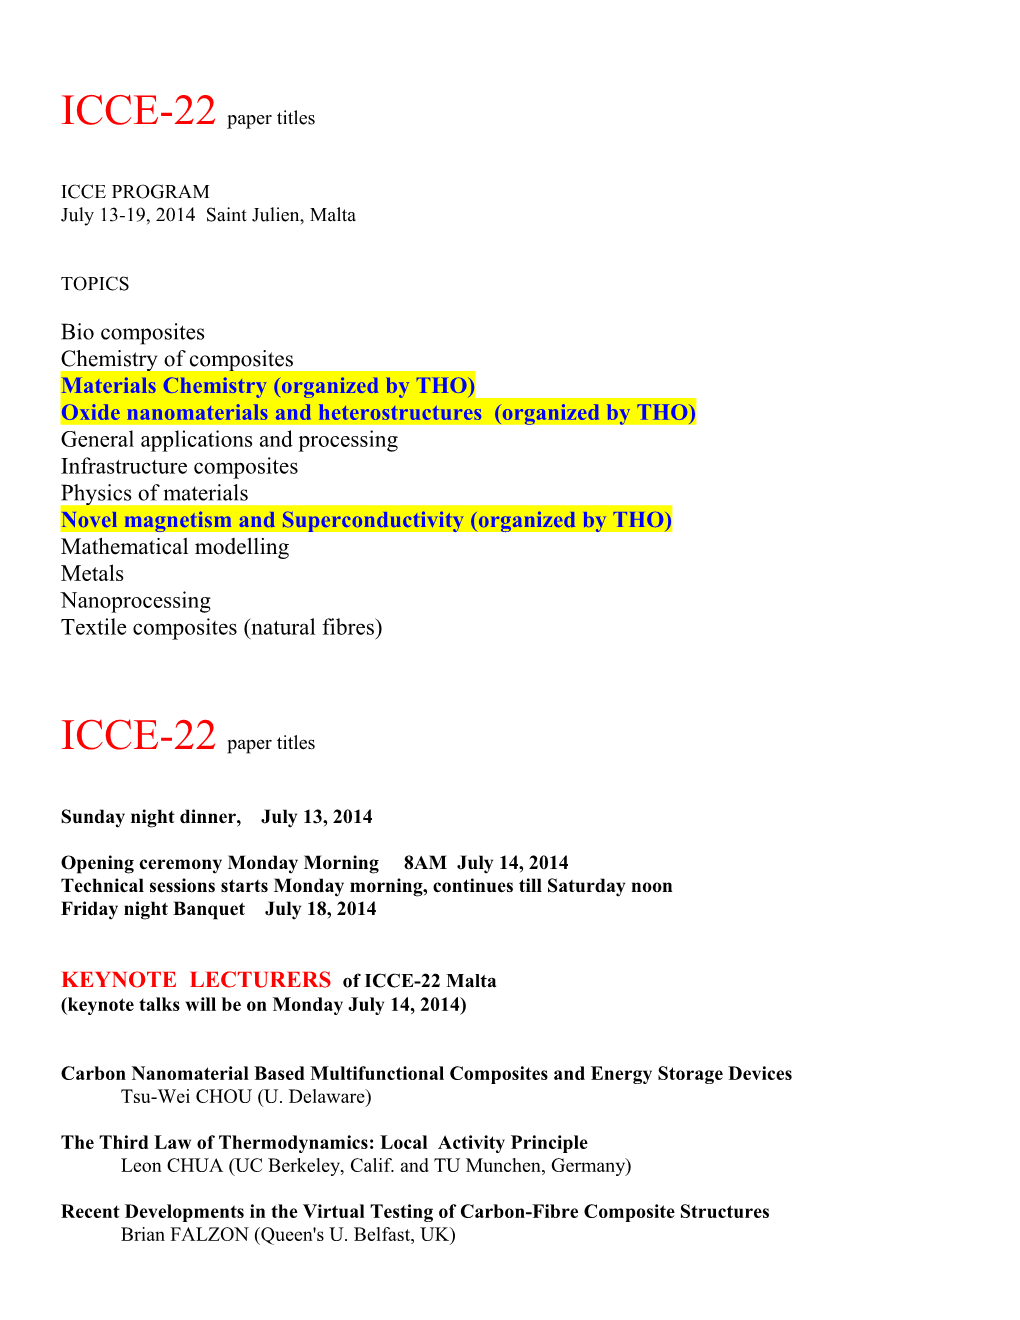 ICCE-22 Paper Titles